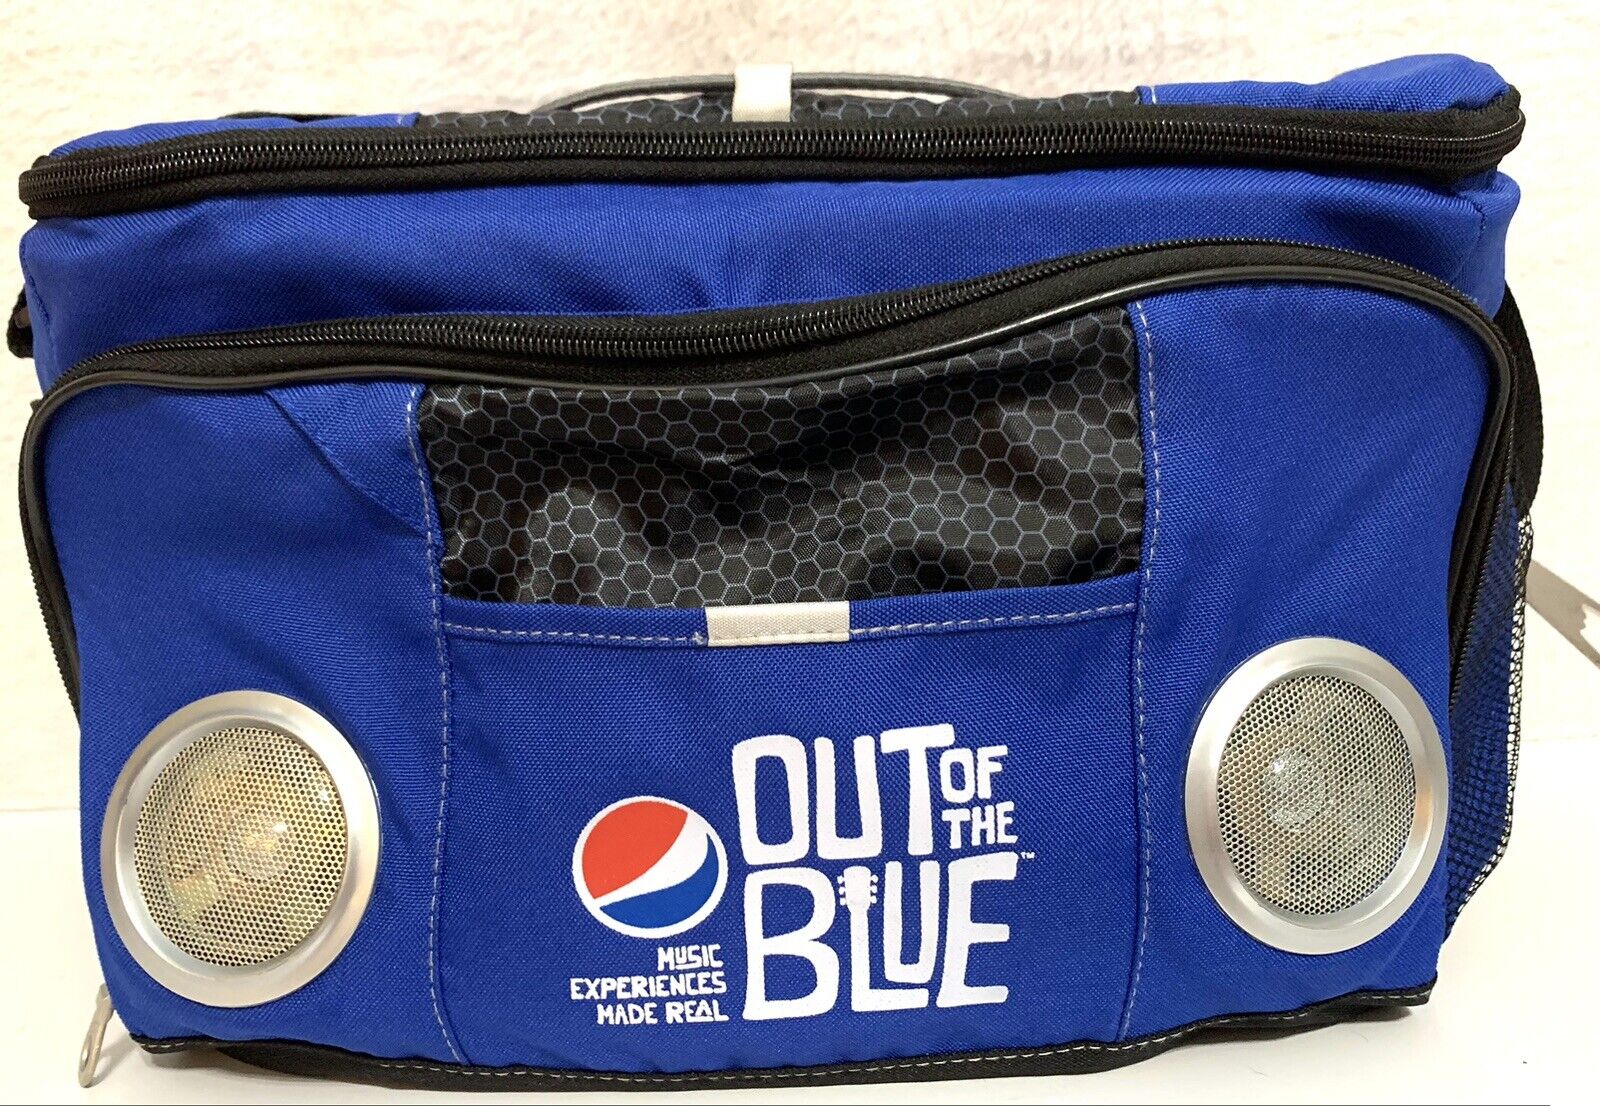 Rare Collectible Vintage Pepsi Promotional Soft Side Cooler With SPEAKERS